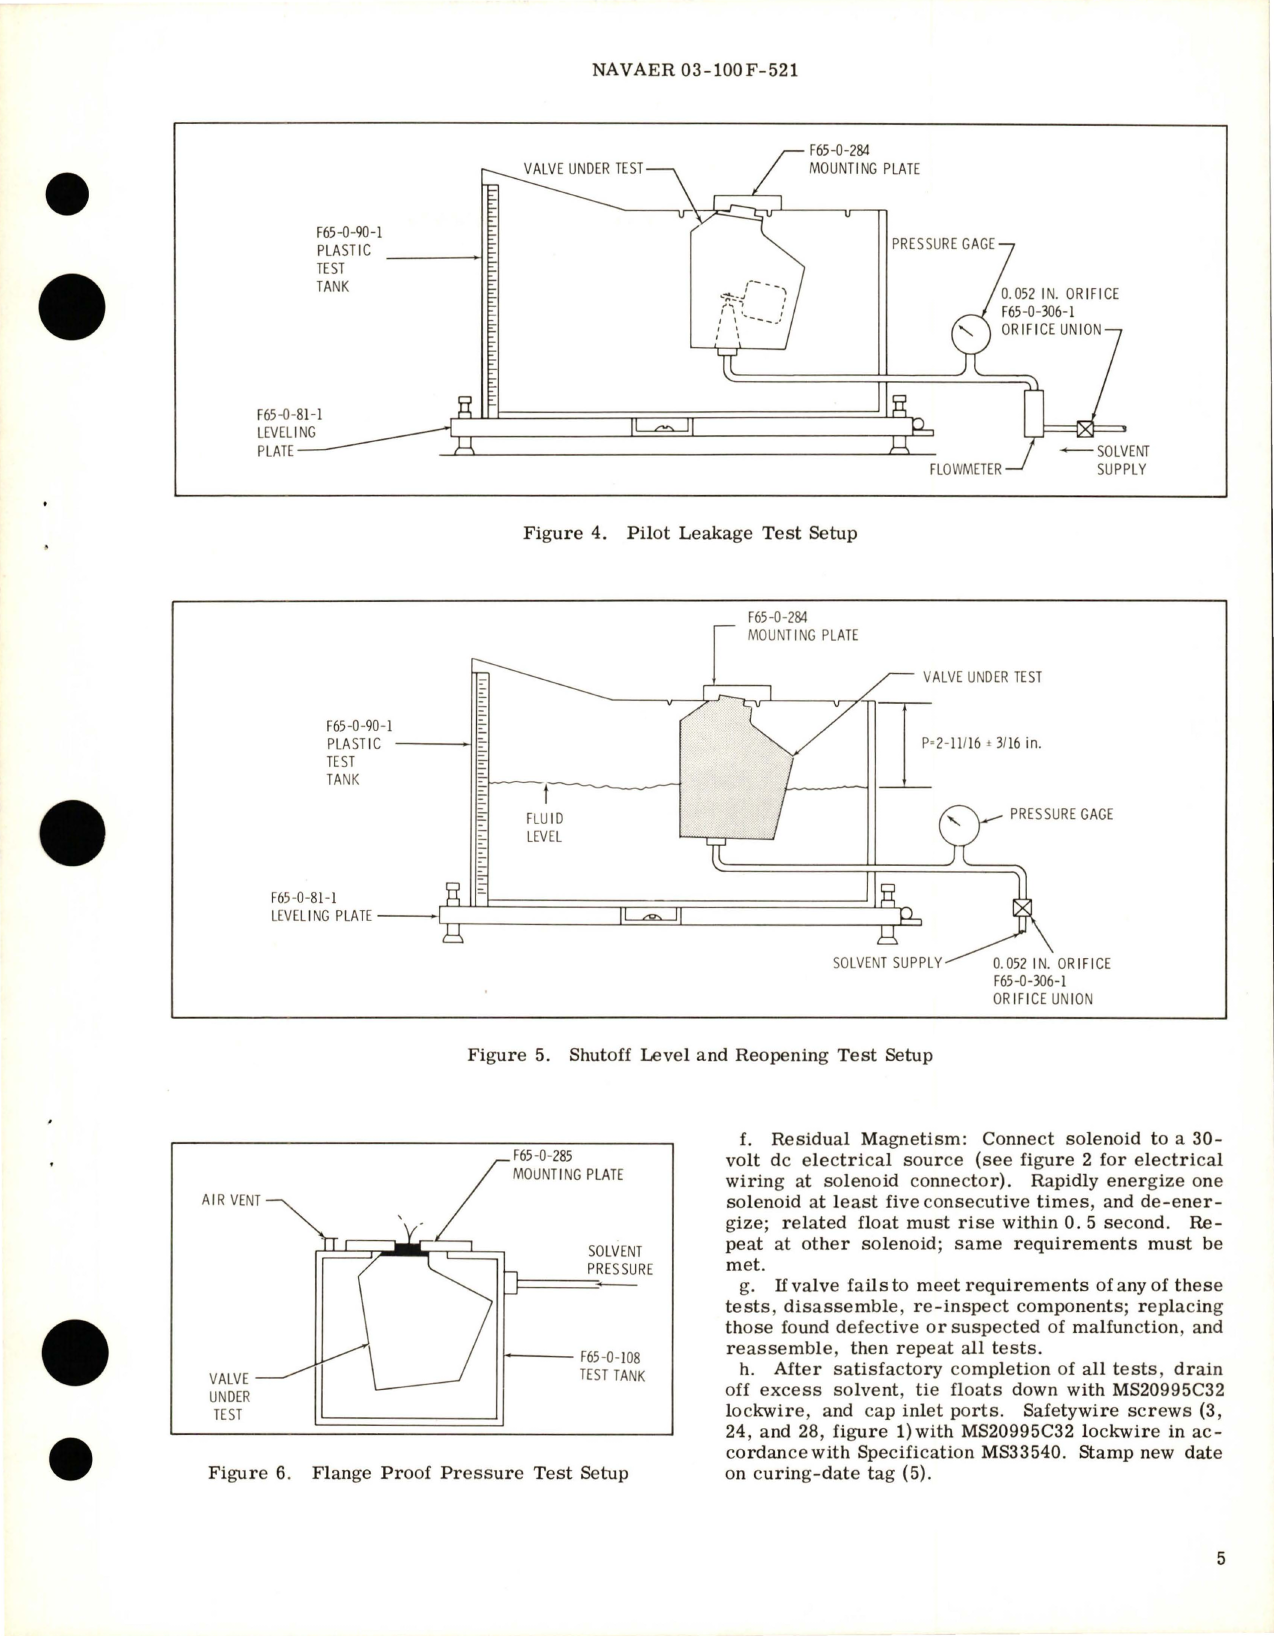 Sample page 5 from AirCorps Library document: Overhaul Instructions with Parts Breakdown for Dual Pilot Fuel Valve - Part 1323-547095 